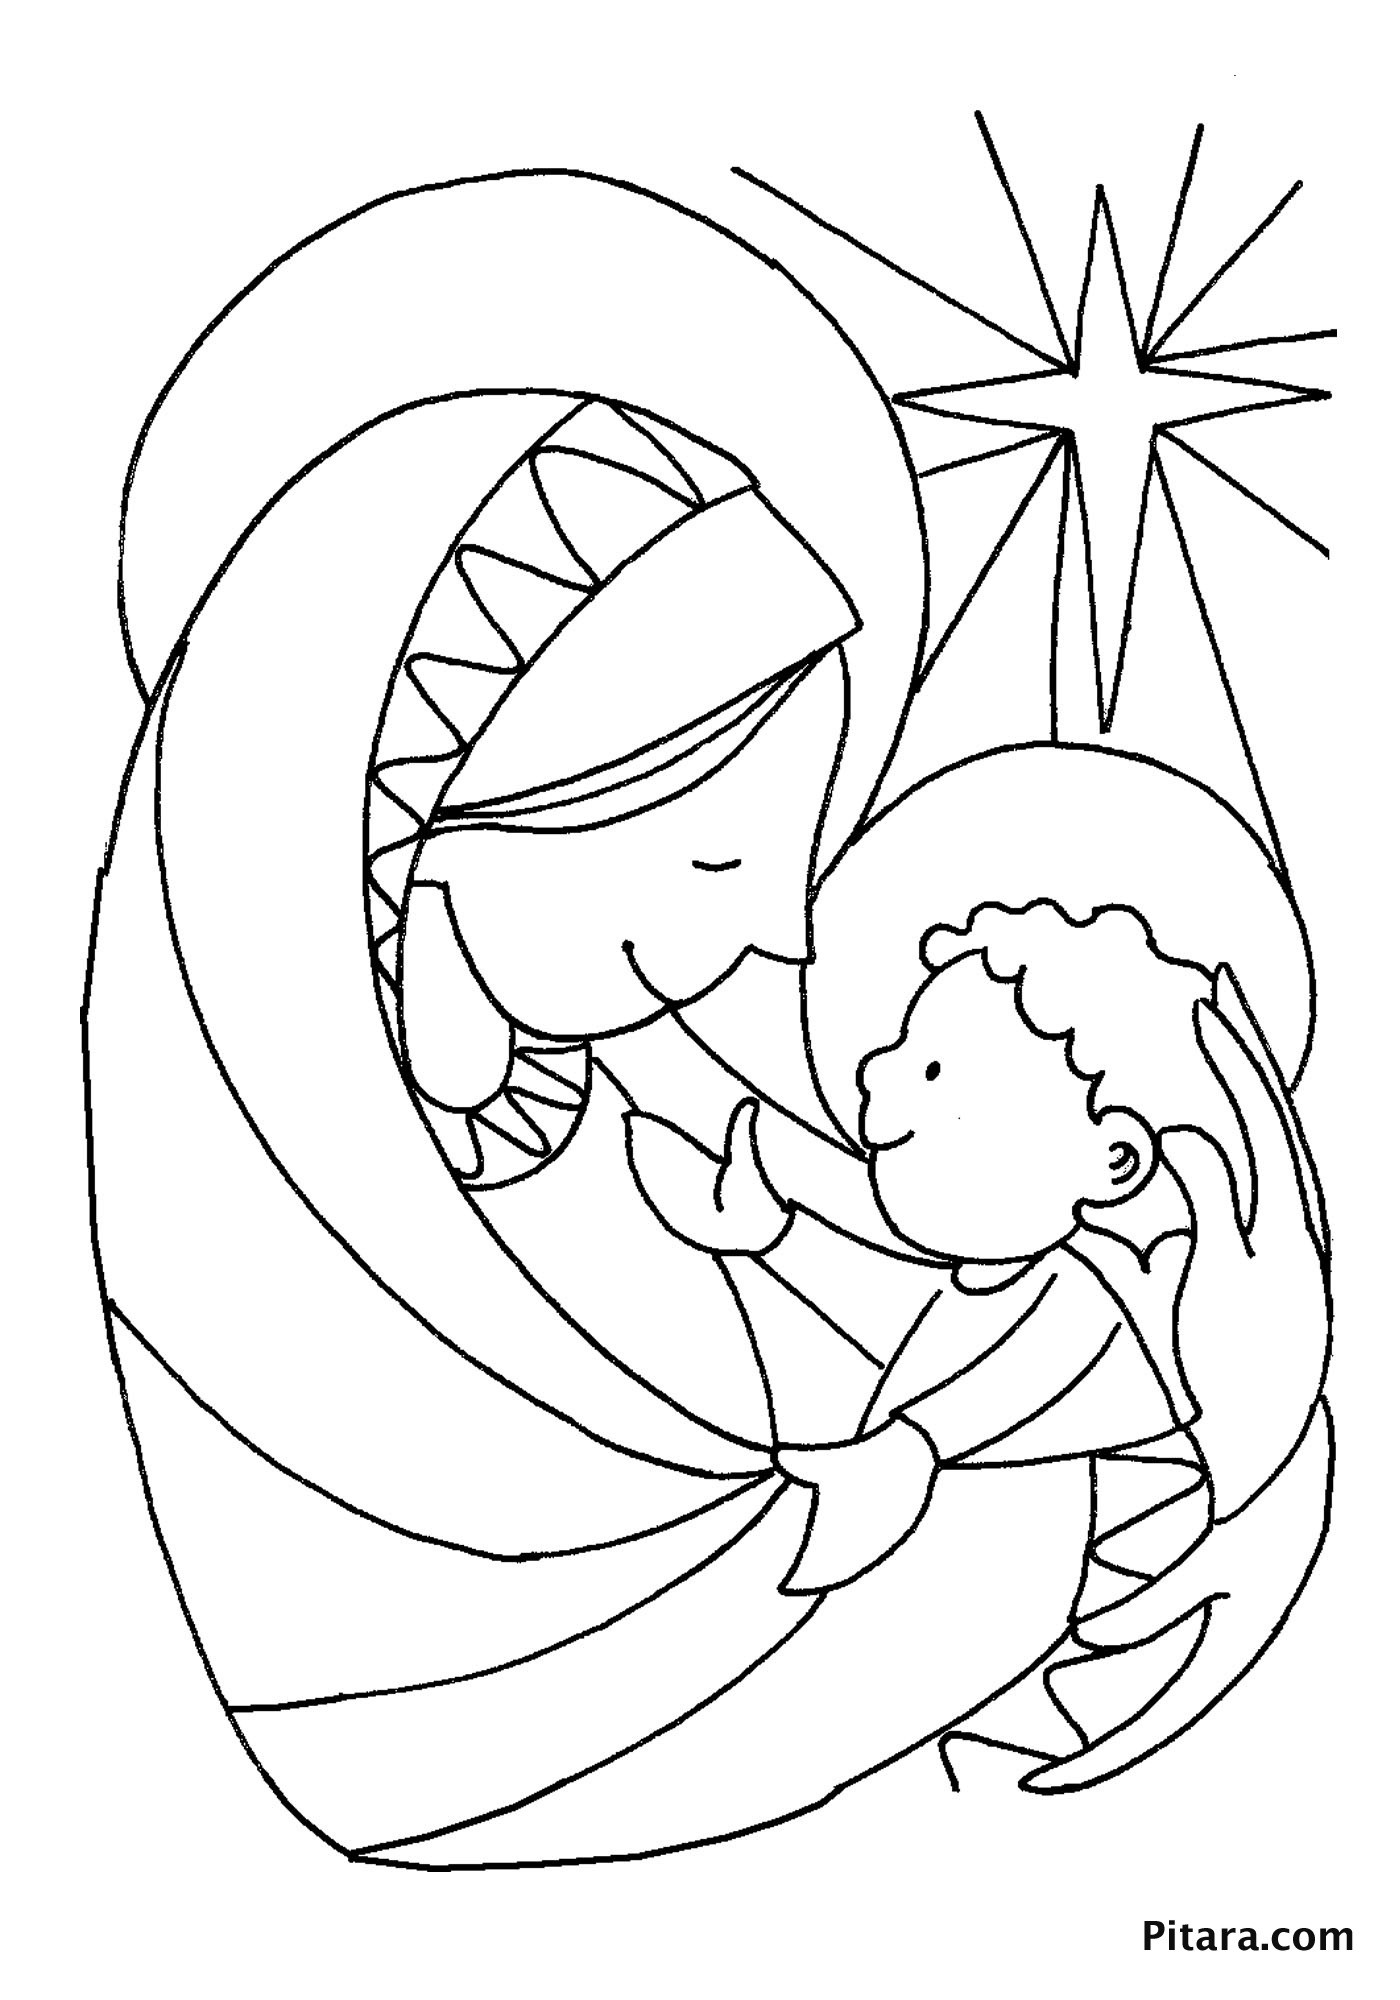 Mary And Baby Jesus Coloring Page
 Mary & baby Jesus – Coloring page